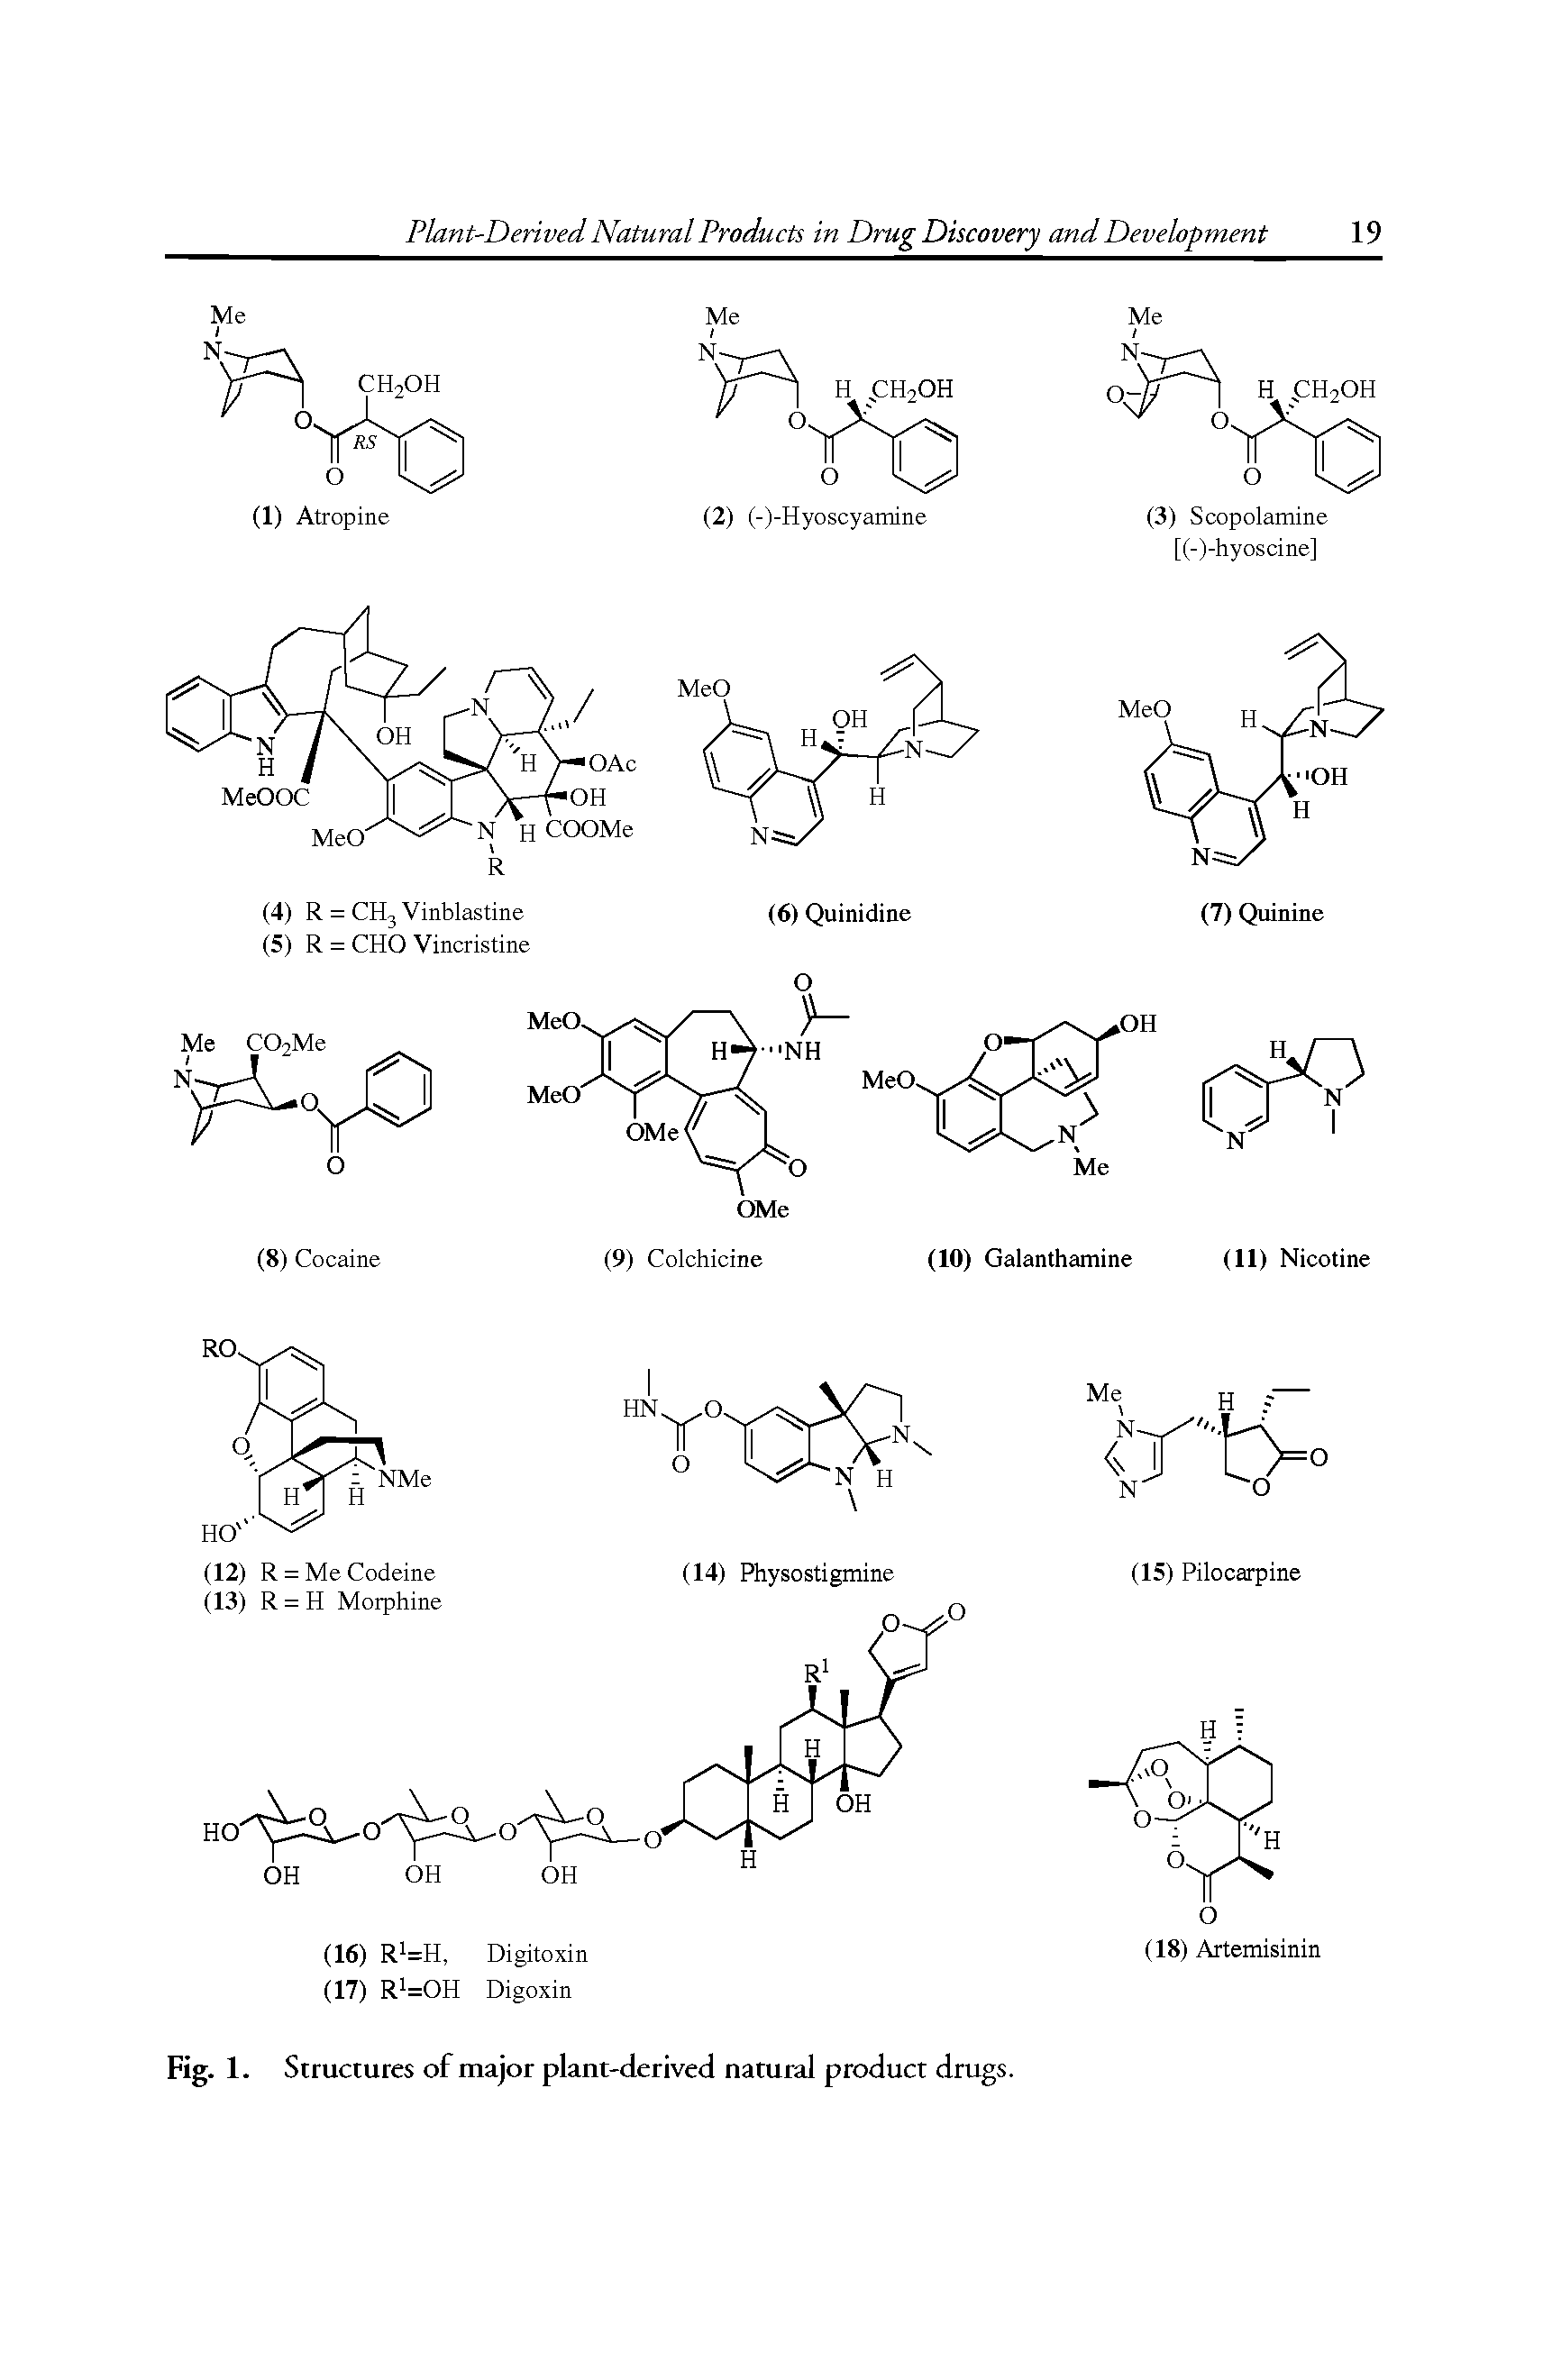 Fig. 1. Structures of major plant-derived natural product drugs.